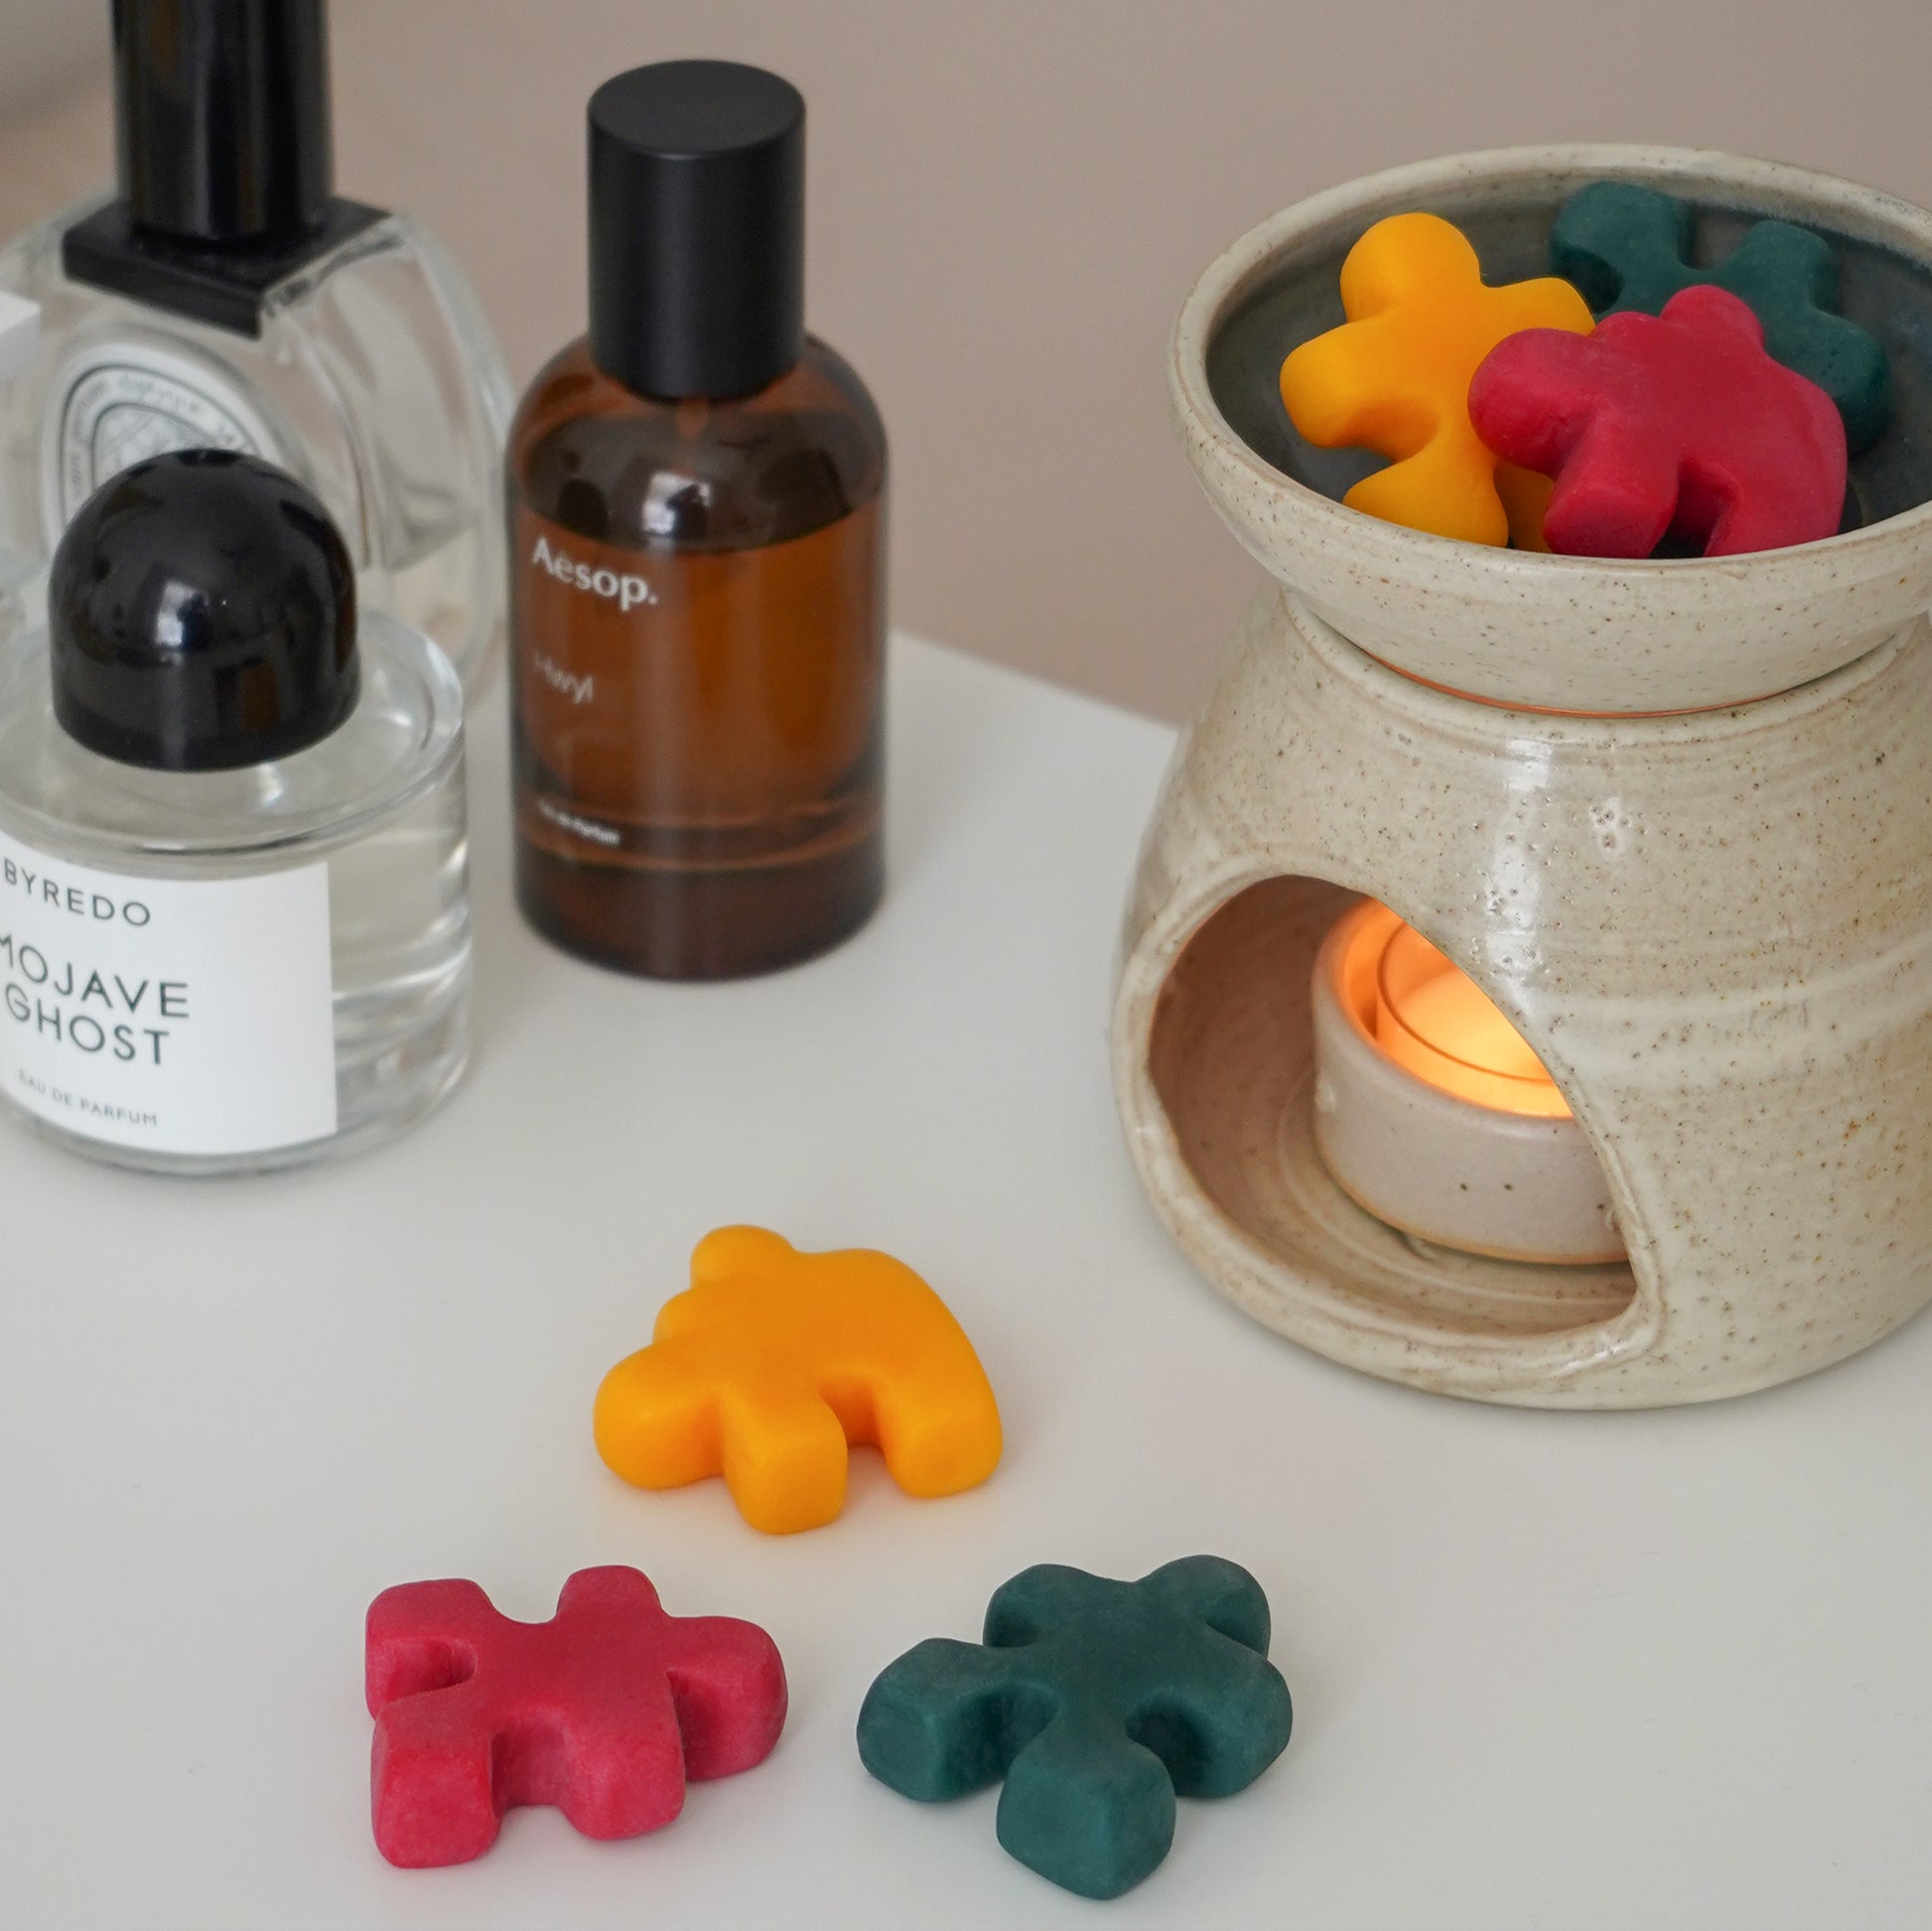 ed, yellow, and green puzzle shape wax melts in a wax warmer and fragrances on the white table